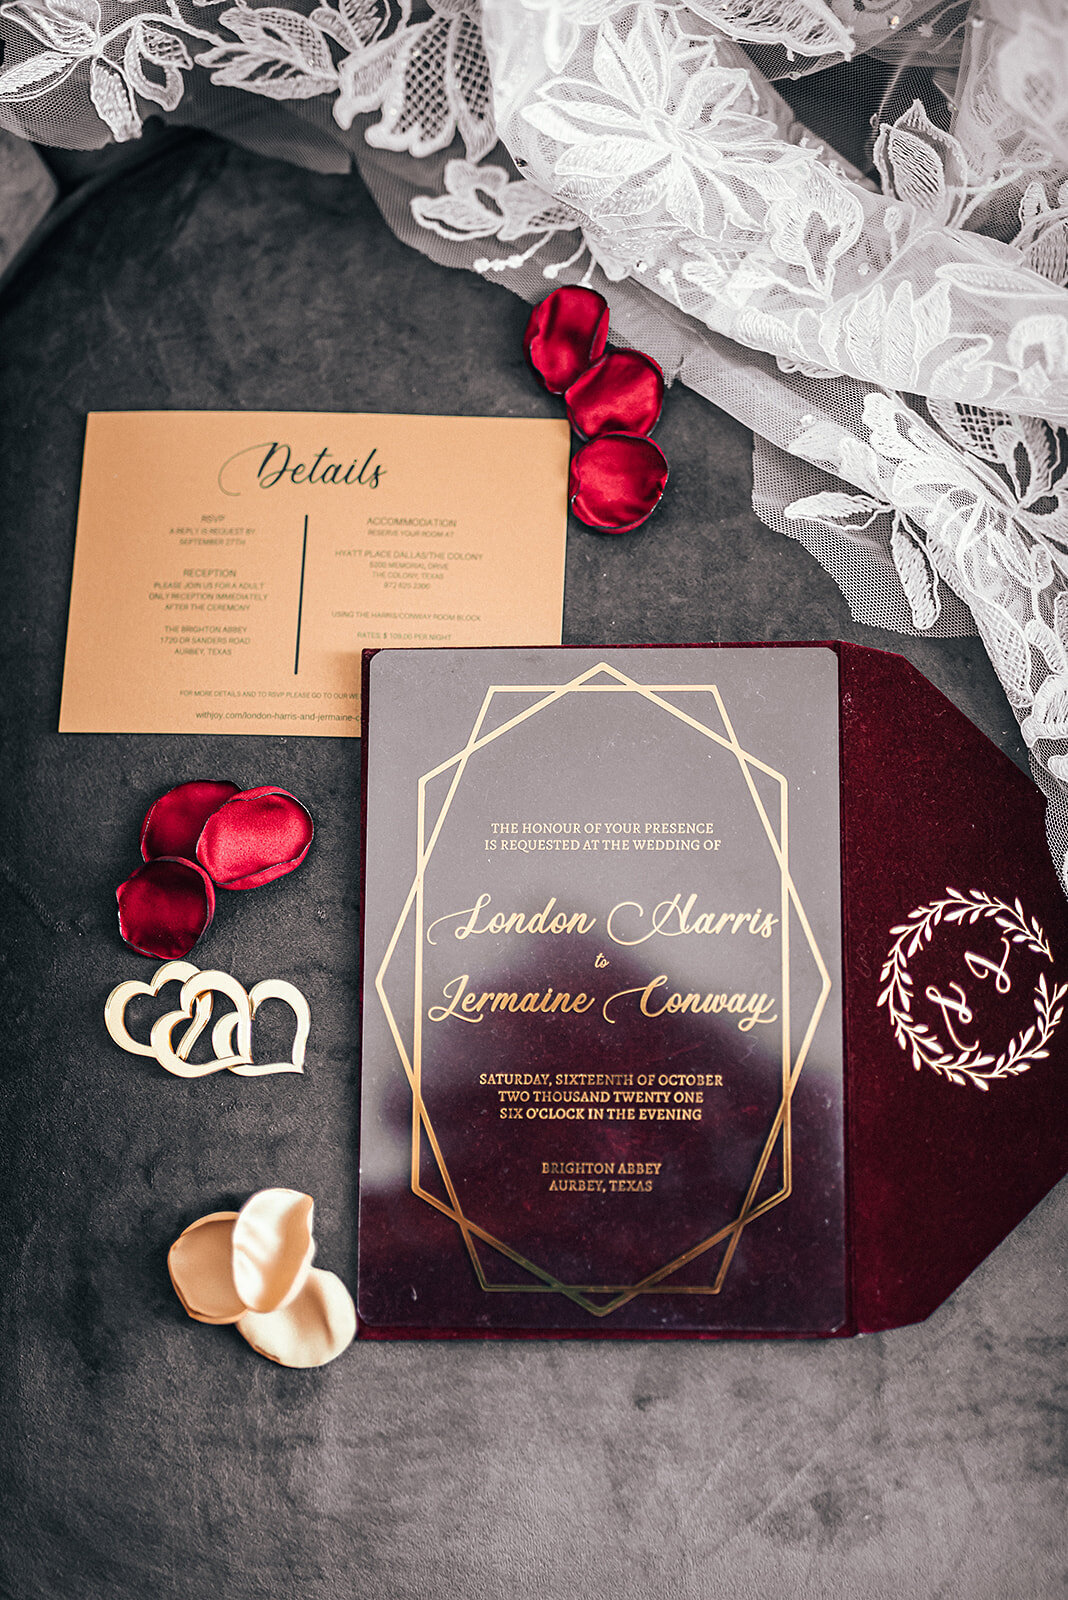 Deep red and gold wedding invitations with rose petals and lace